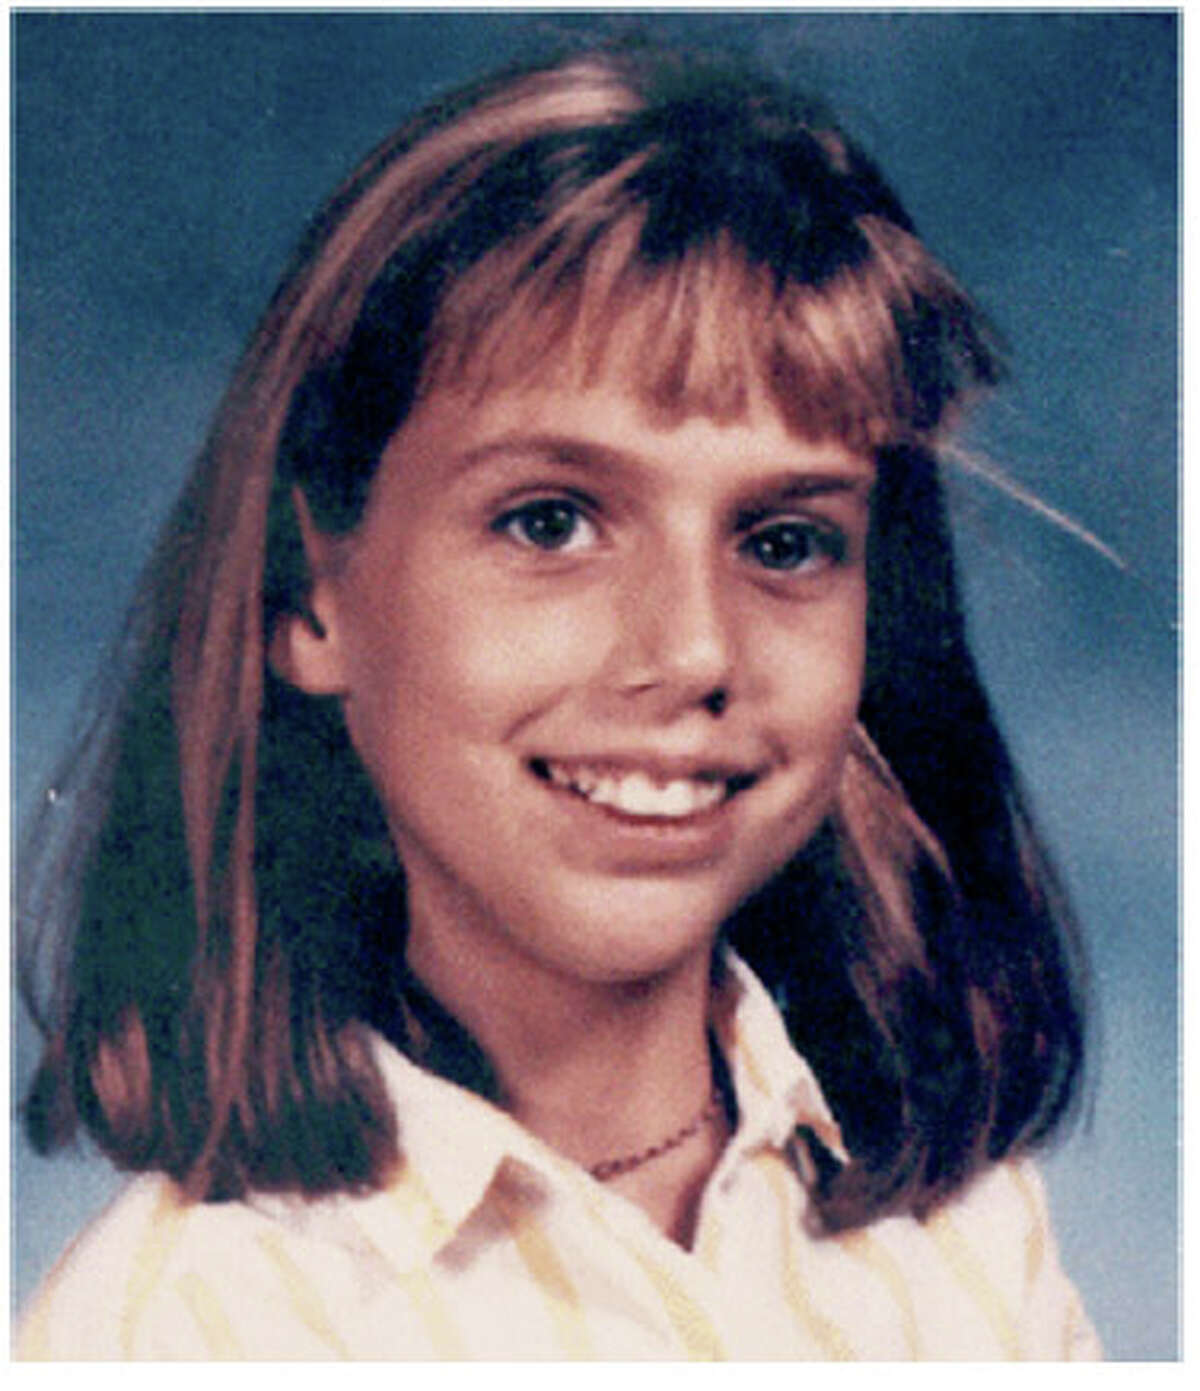 Heidi Seeman was kidnapped Aug. 4, 1990. She was found dead Aug. 26 near Wimberly. Her murder has never been solved